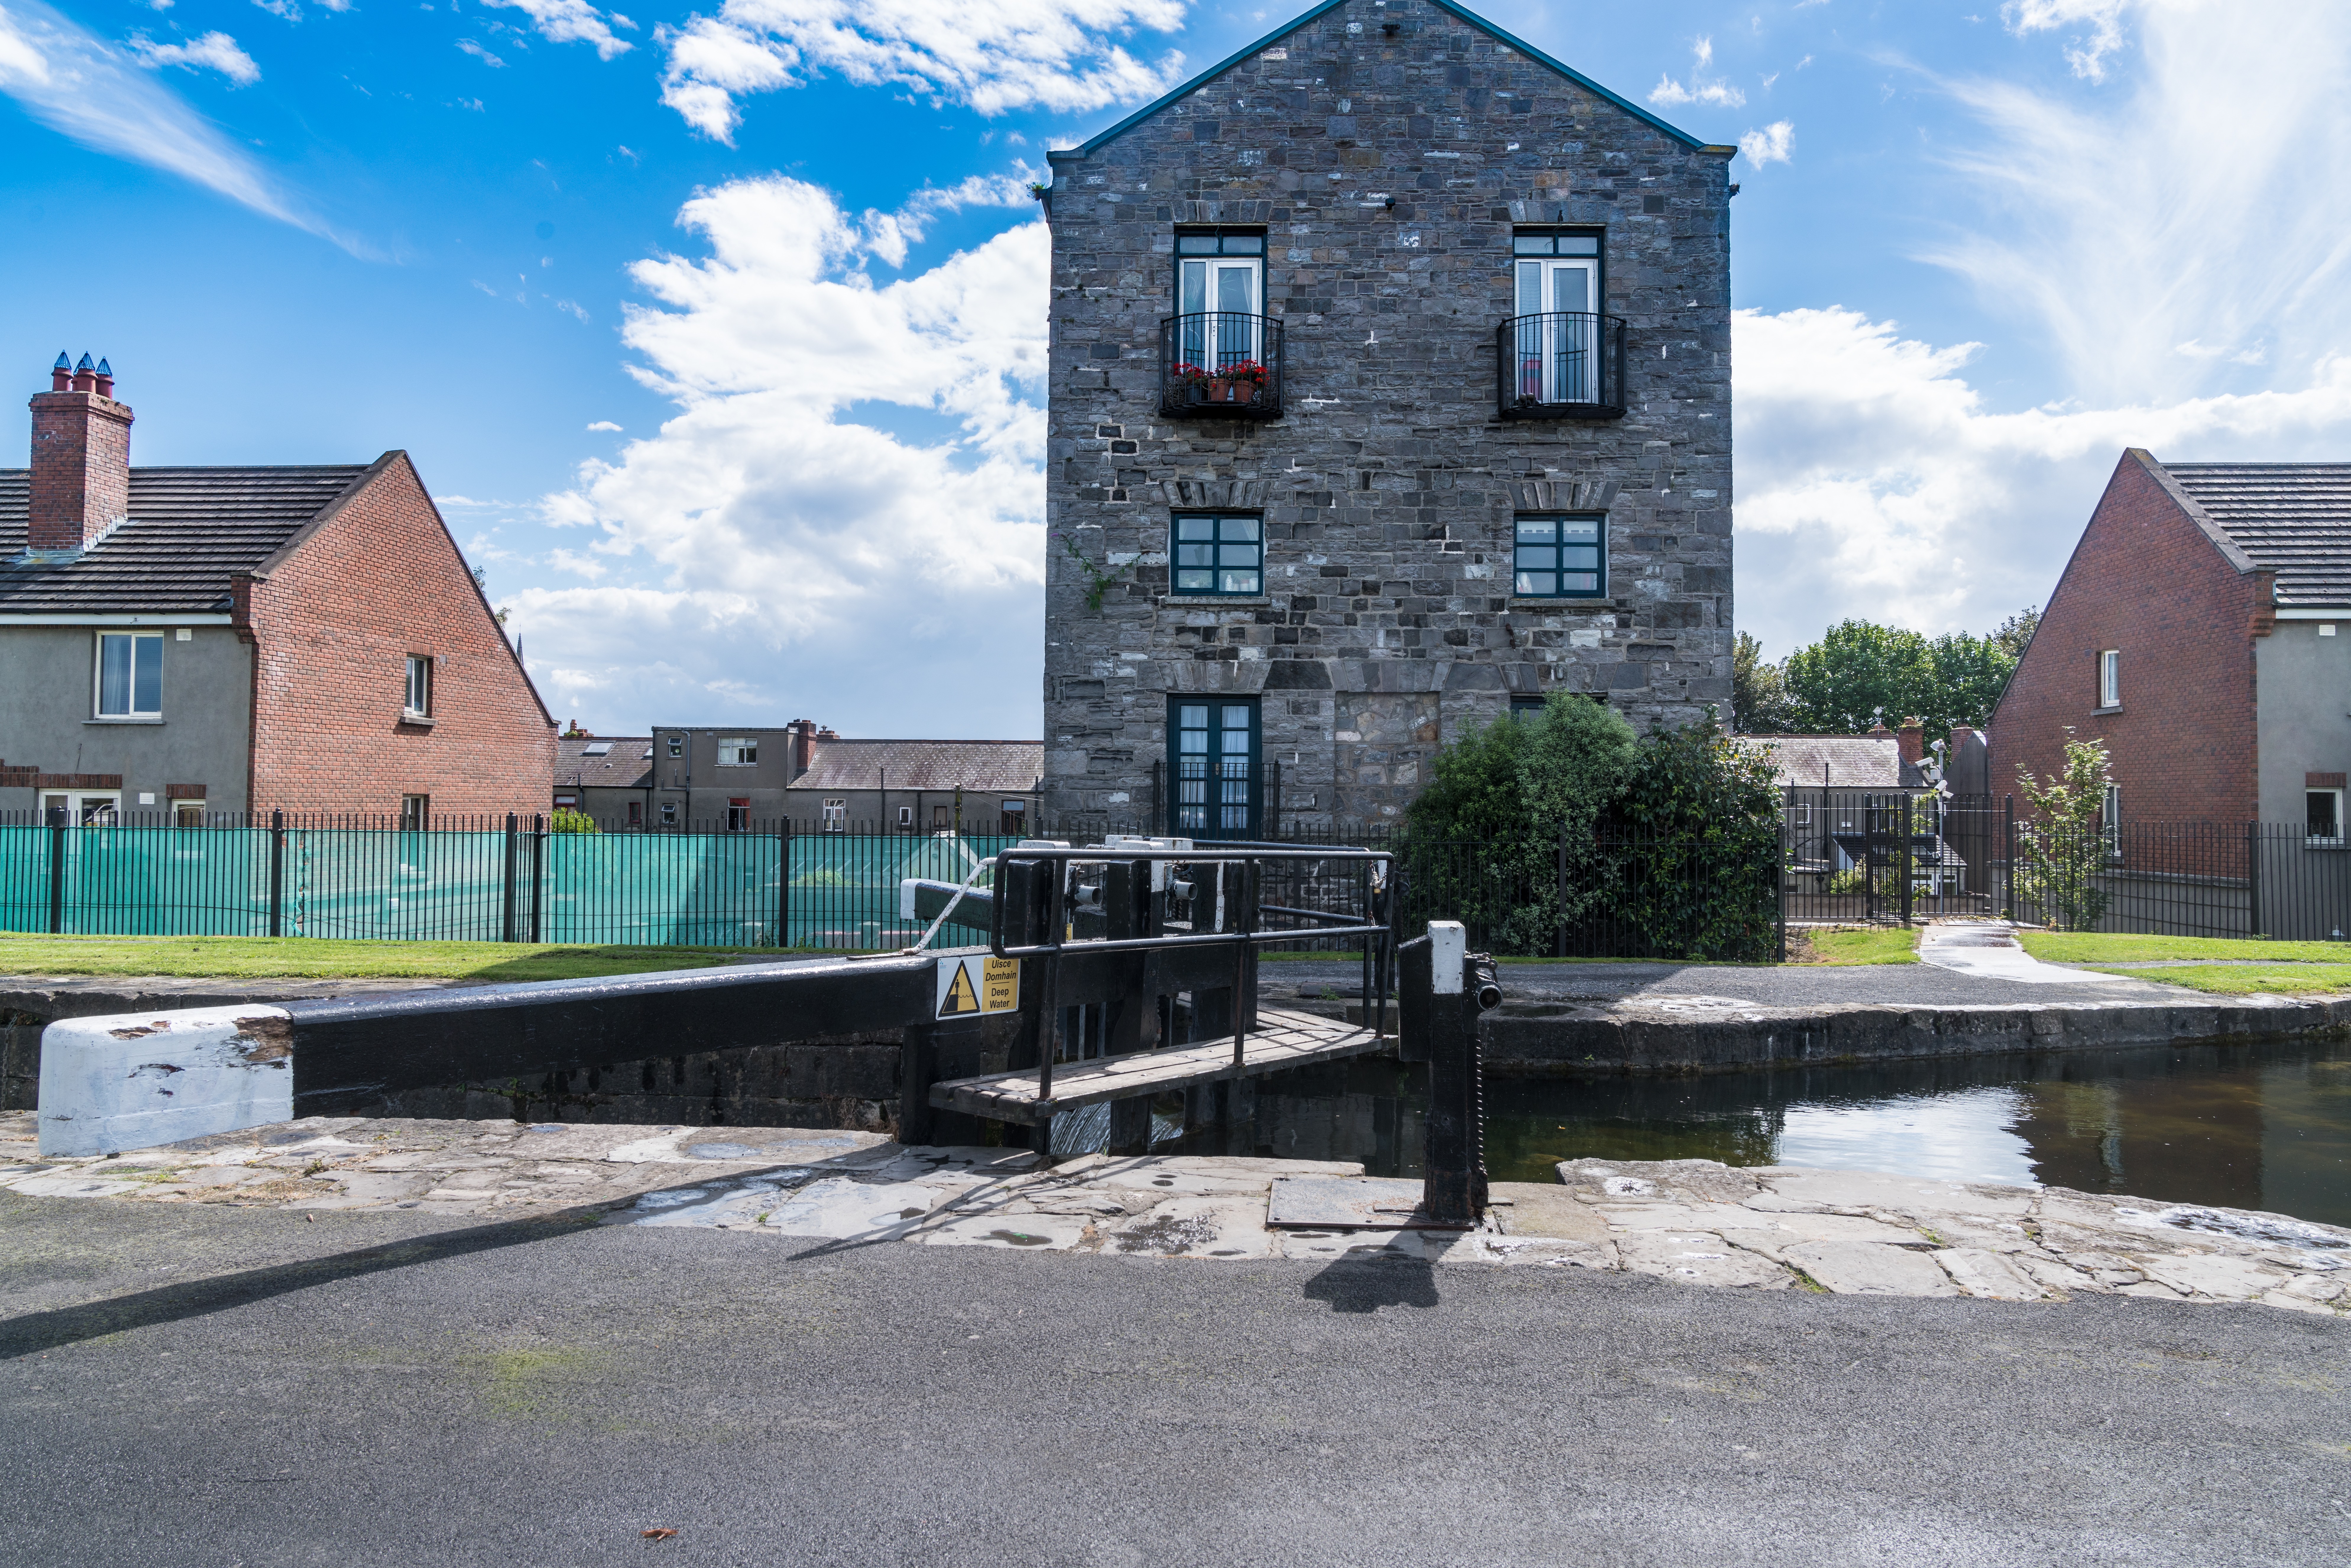  ROYAL CANAL - CABRA AREA 013 